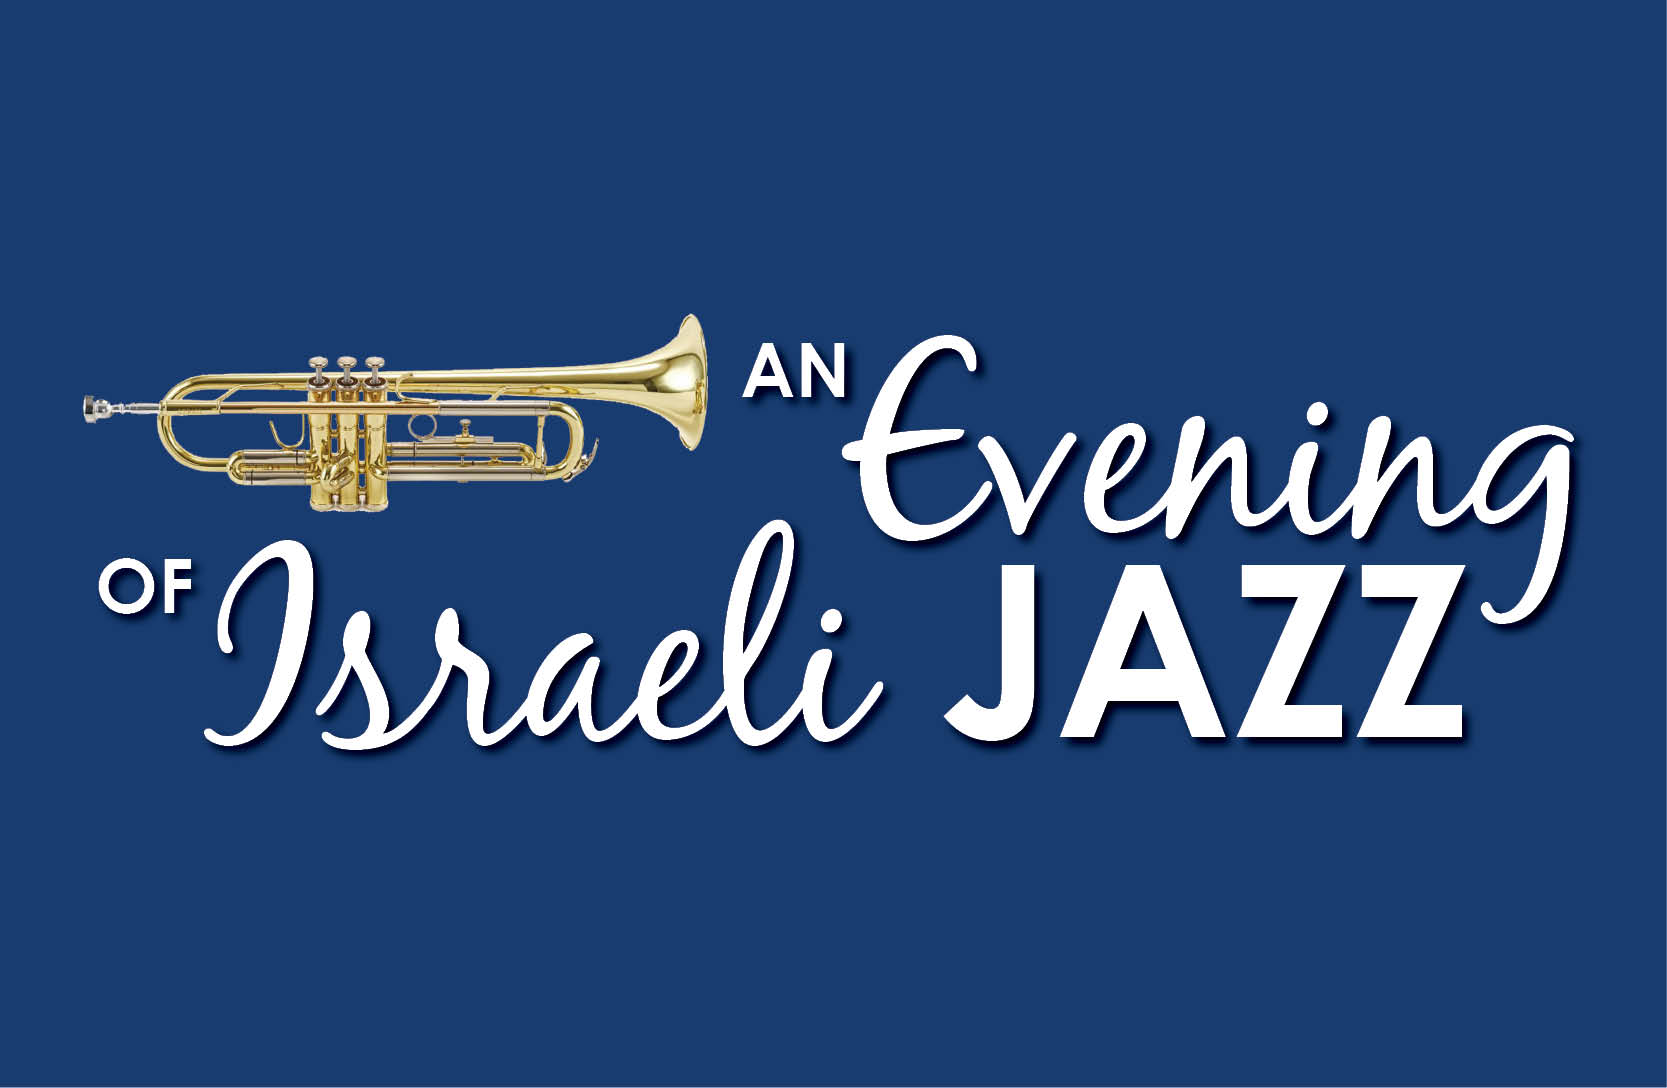 An Evening of Israeli Jazz Music and Discussion